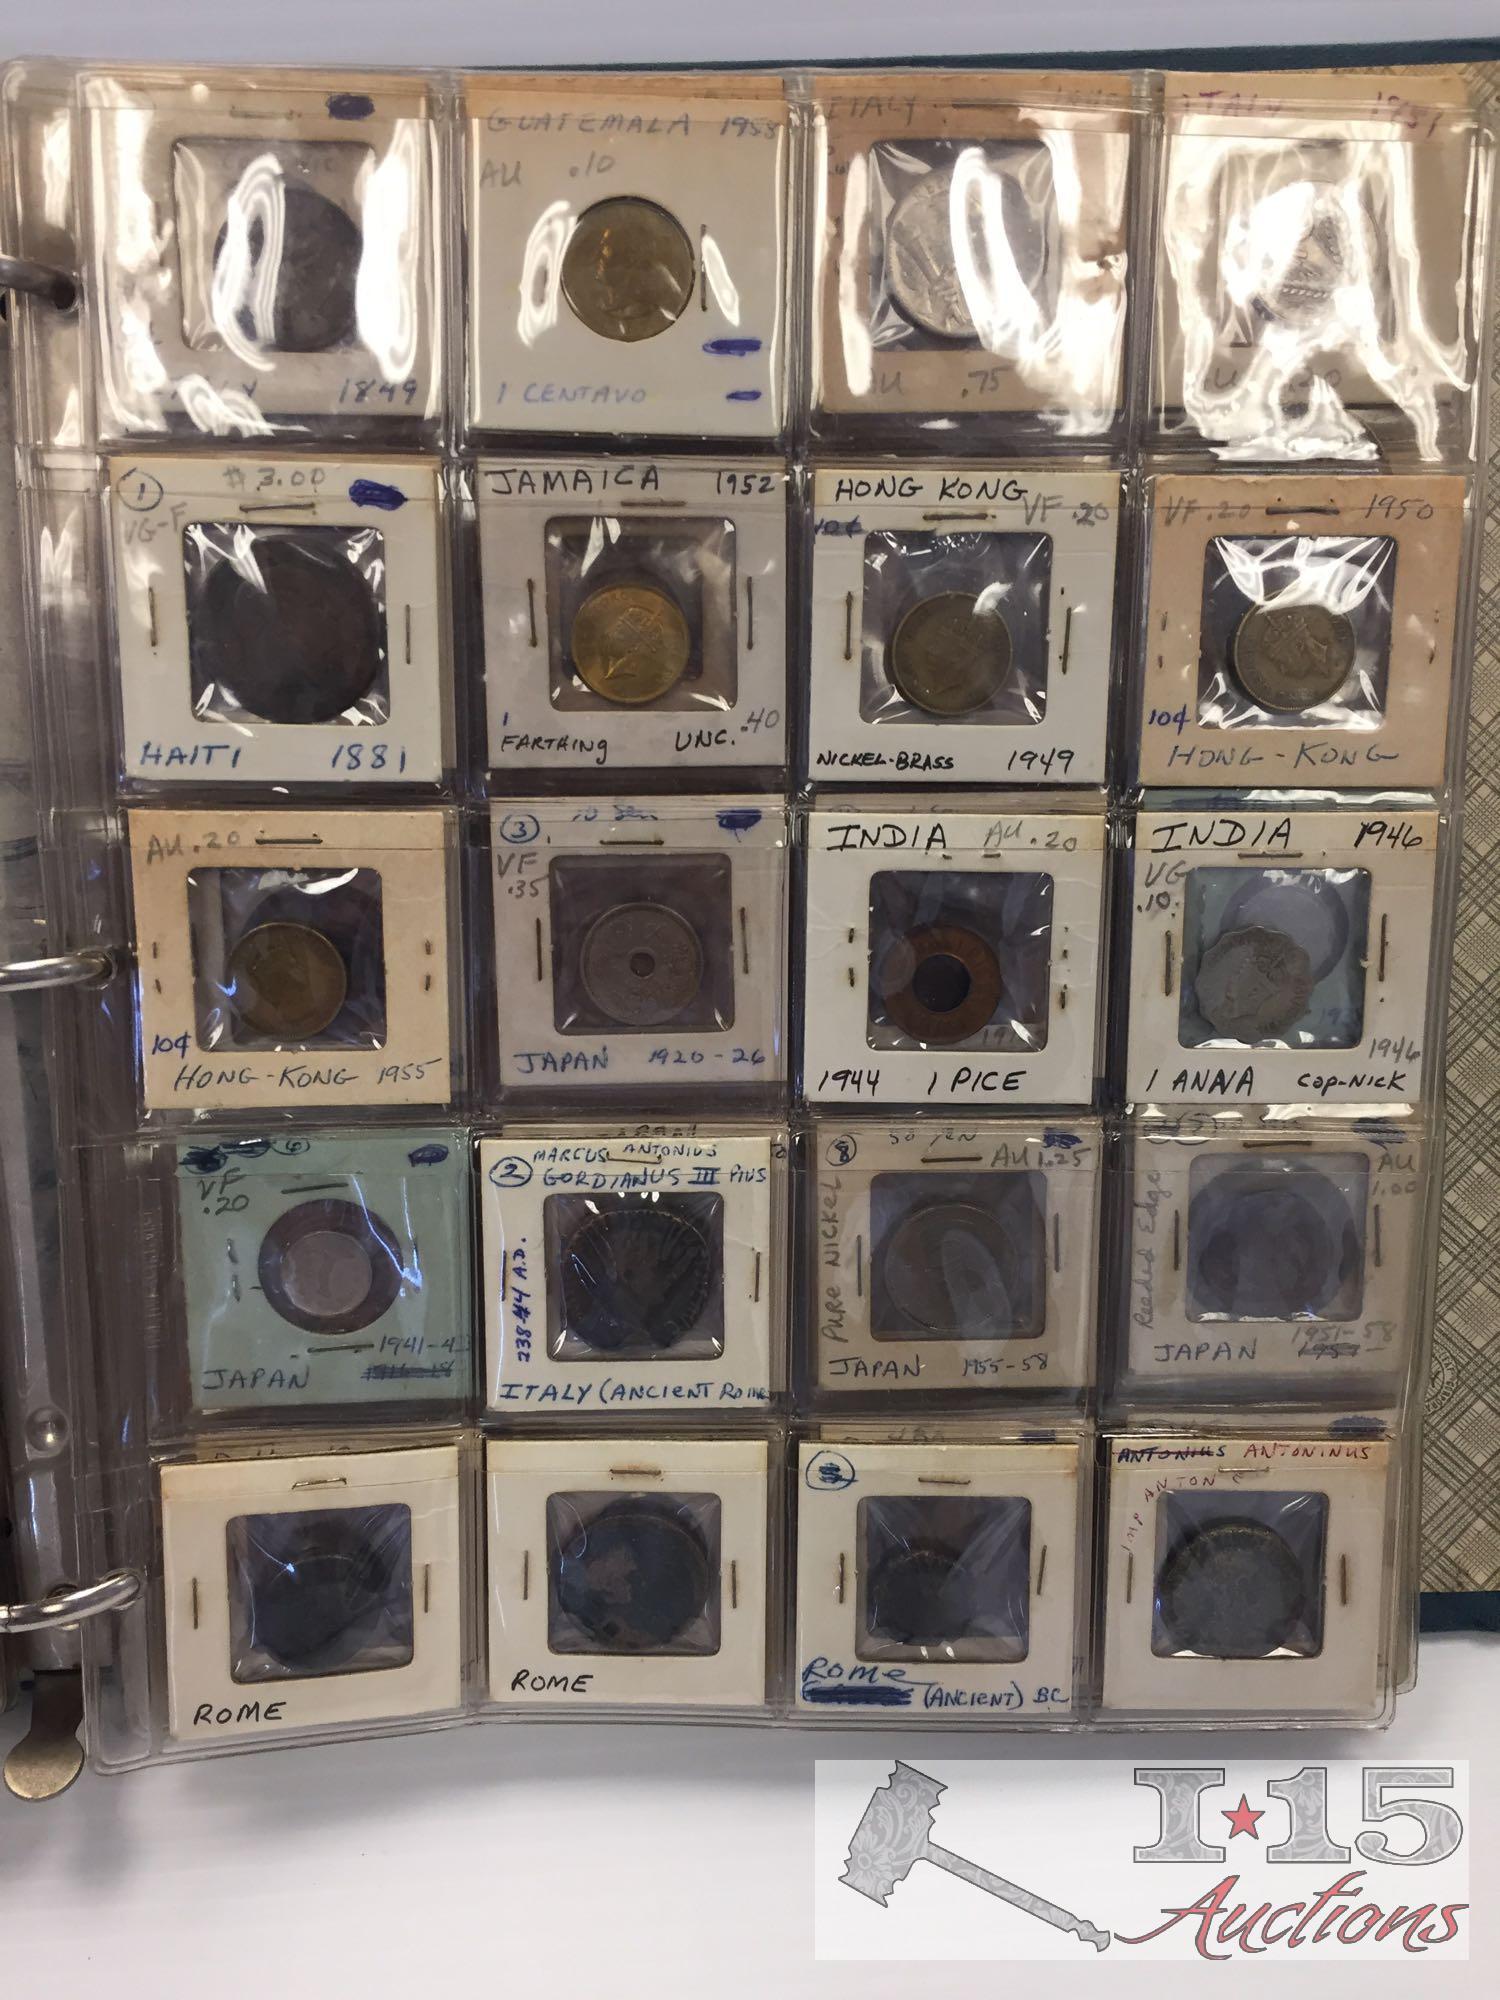 Over 300 Collector Foreign Coins! From Ancient Coins all the Way to the 1950's!